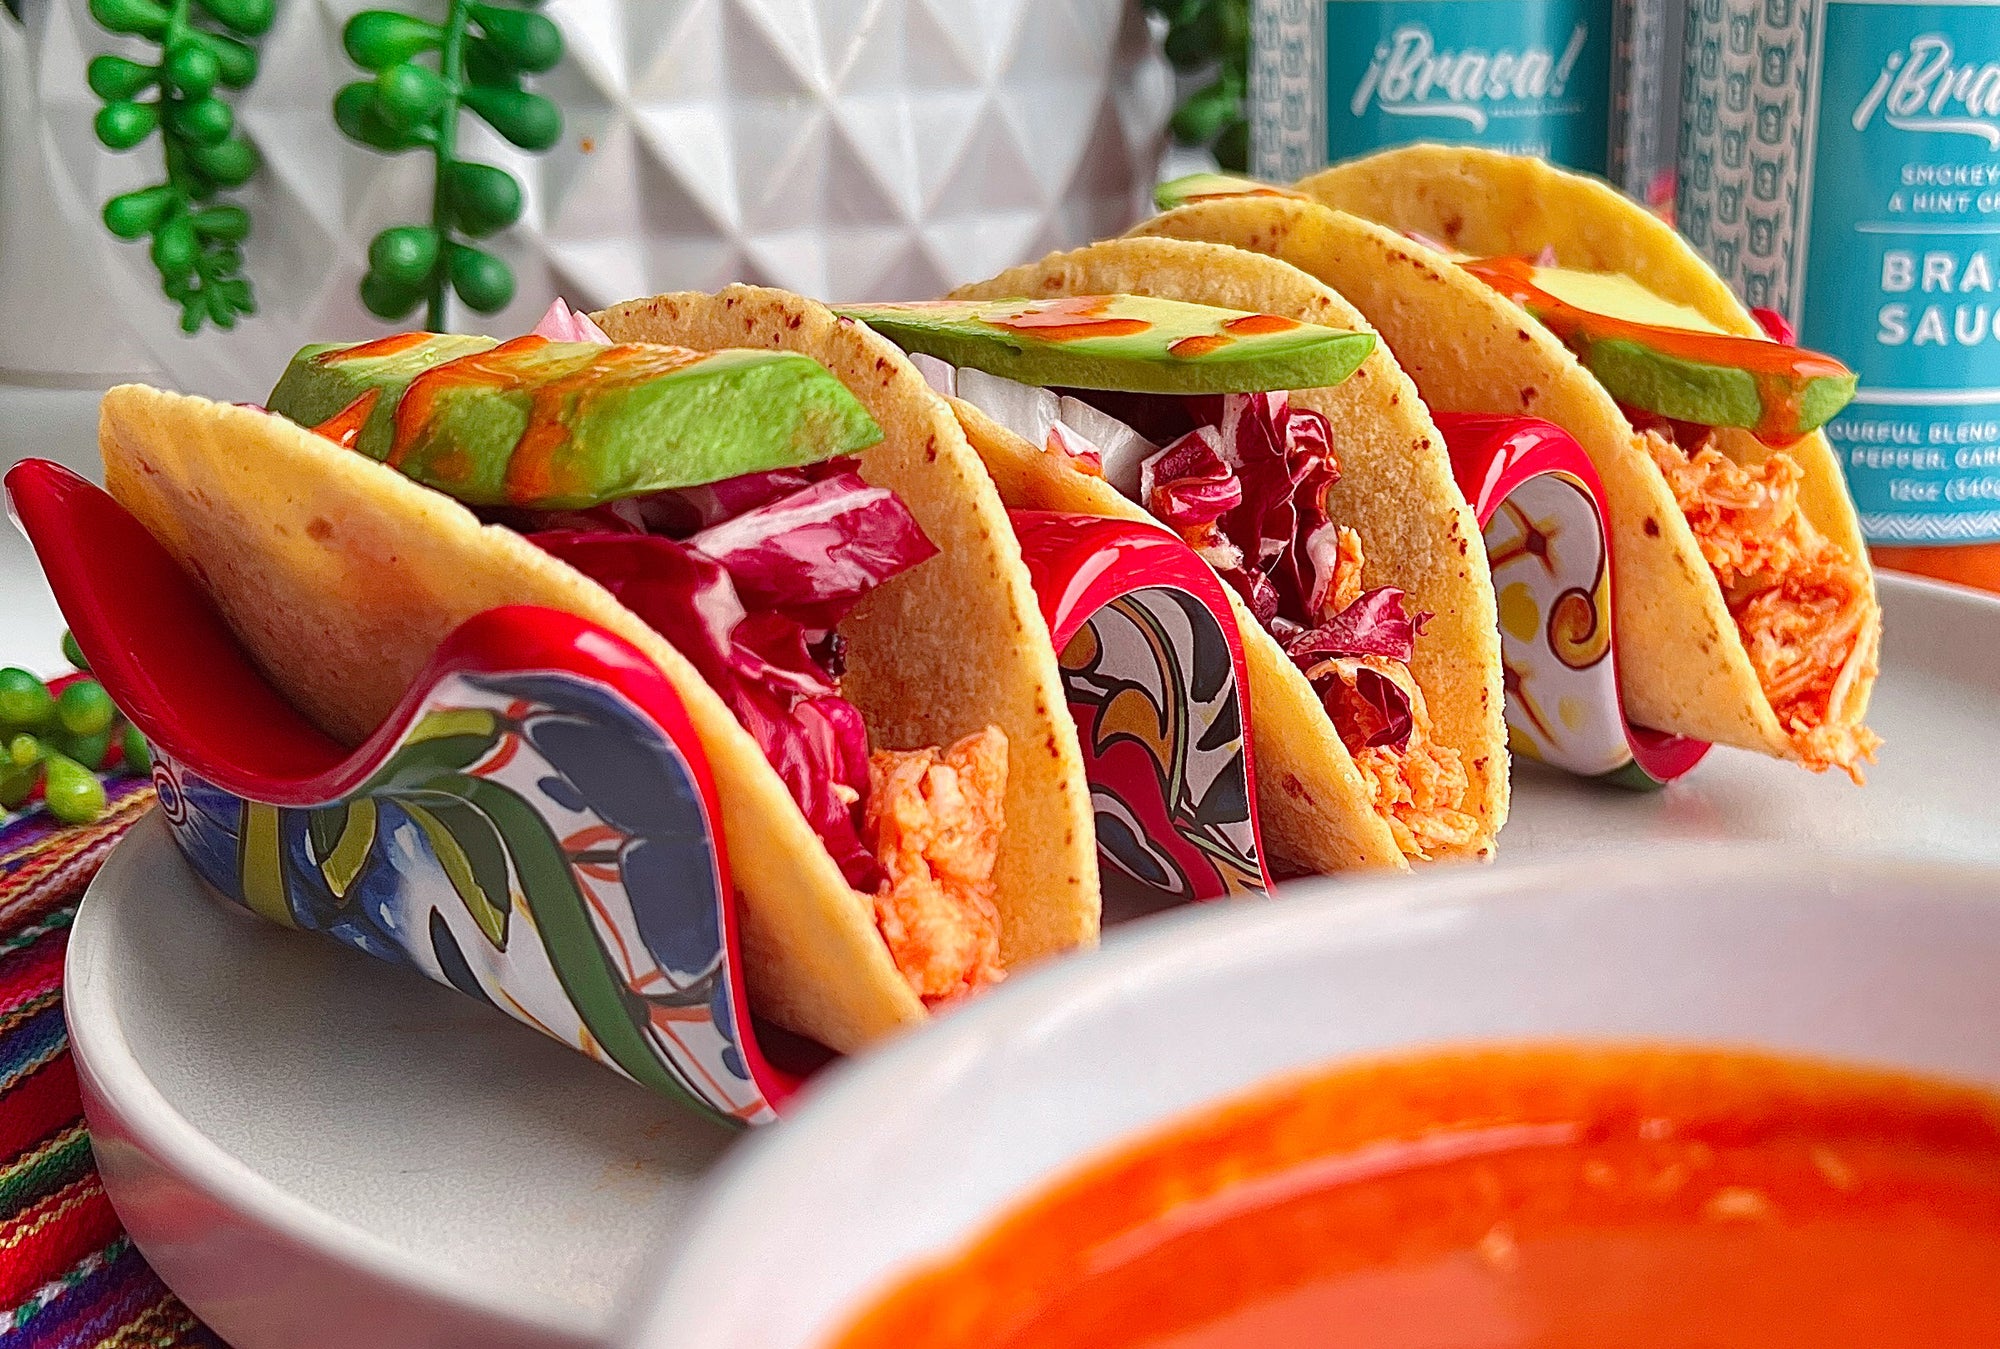 Tantalize Your Taste Buds With This Easy Shredded Chicken Tacos With Brasa Sauce Recipe!